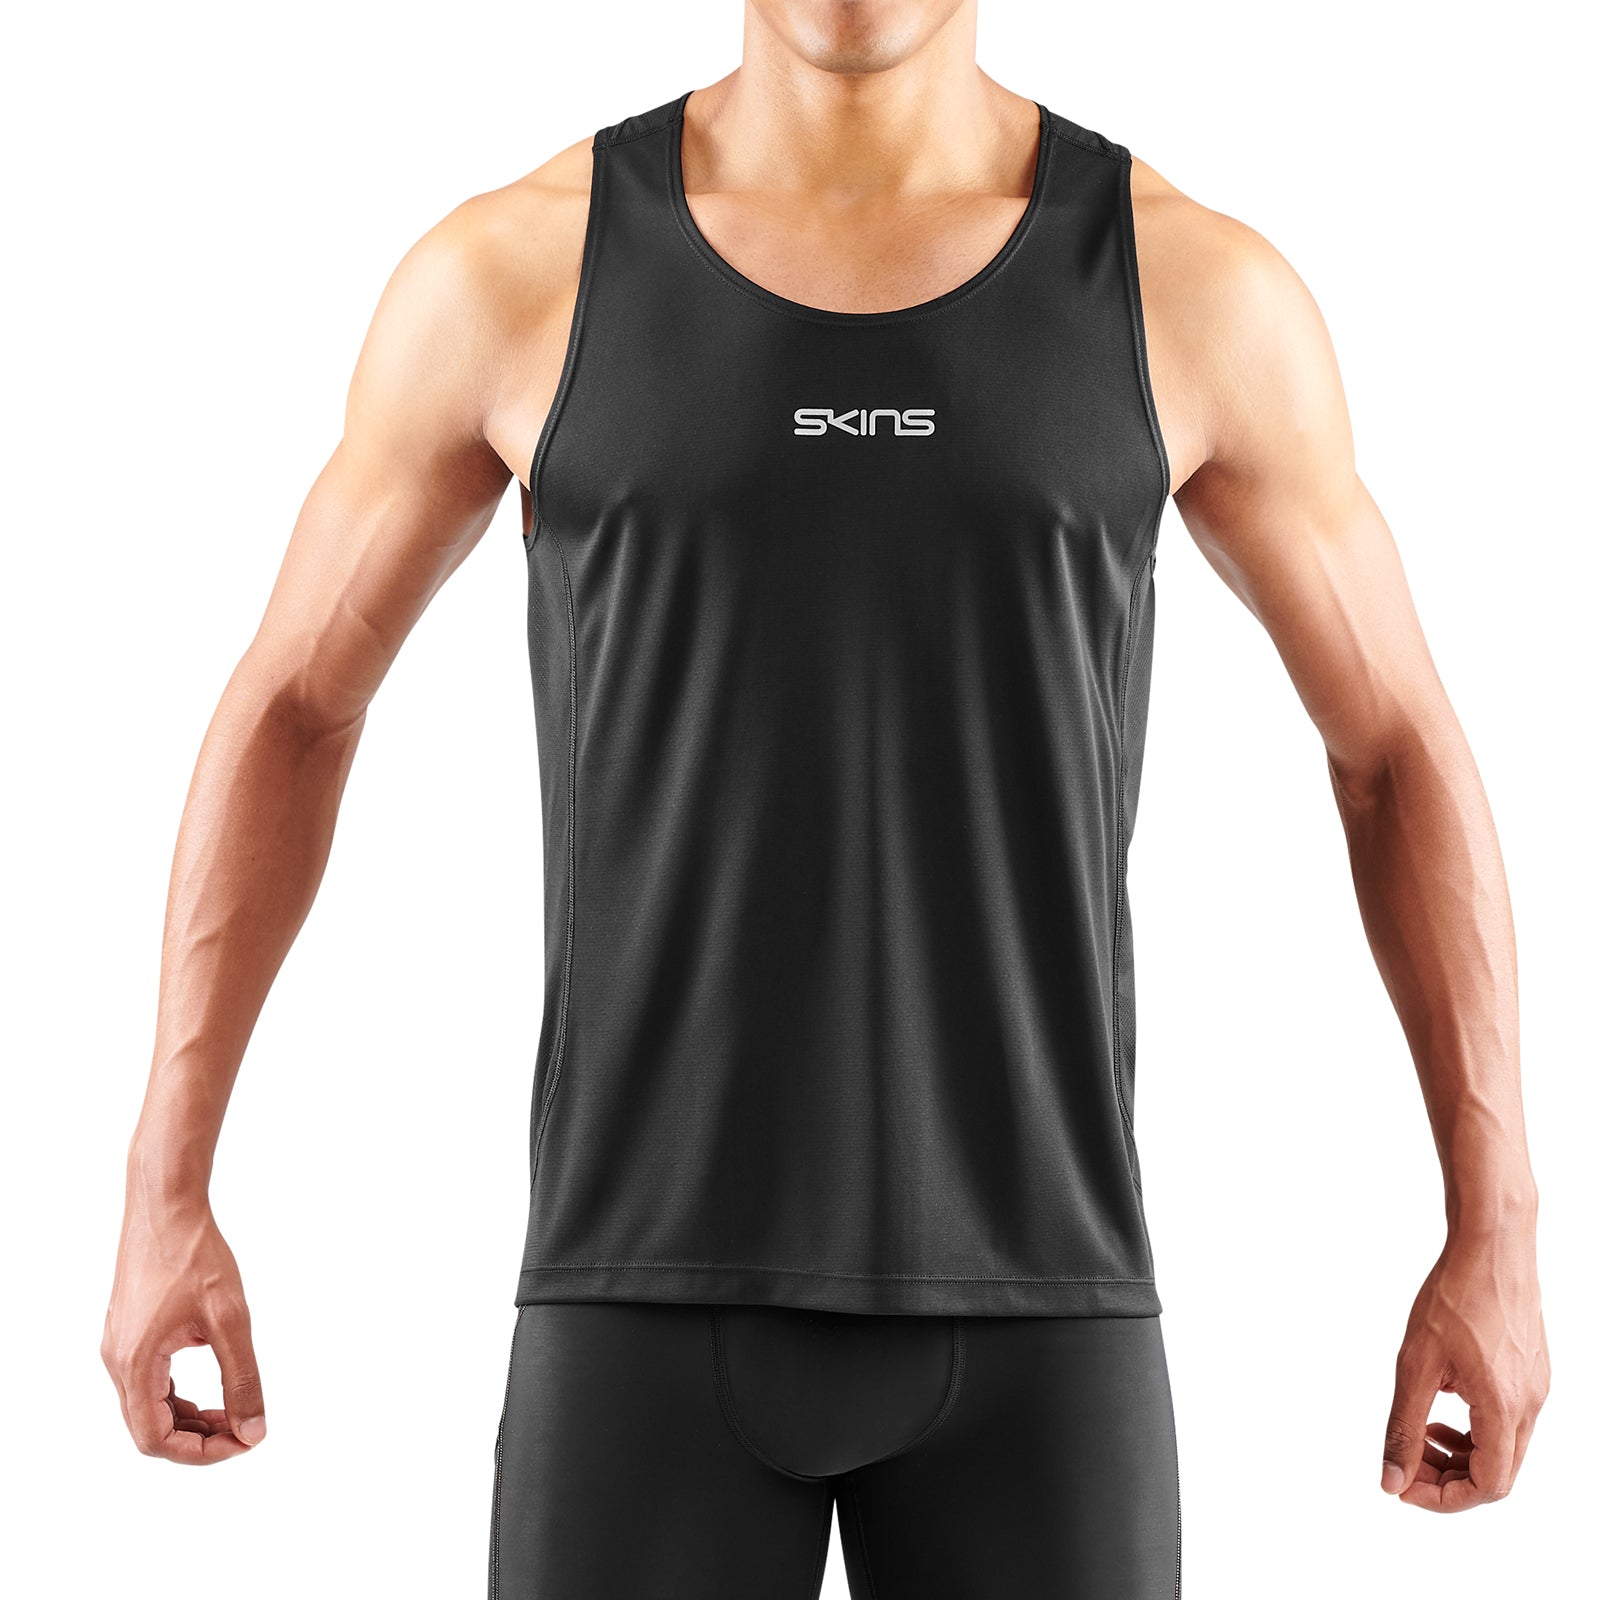 Skins Compression Top Men's Black New without Tags